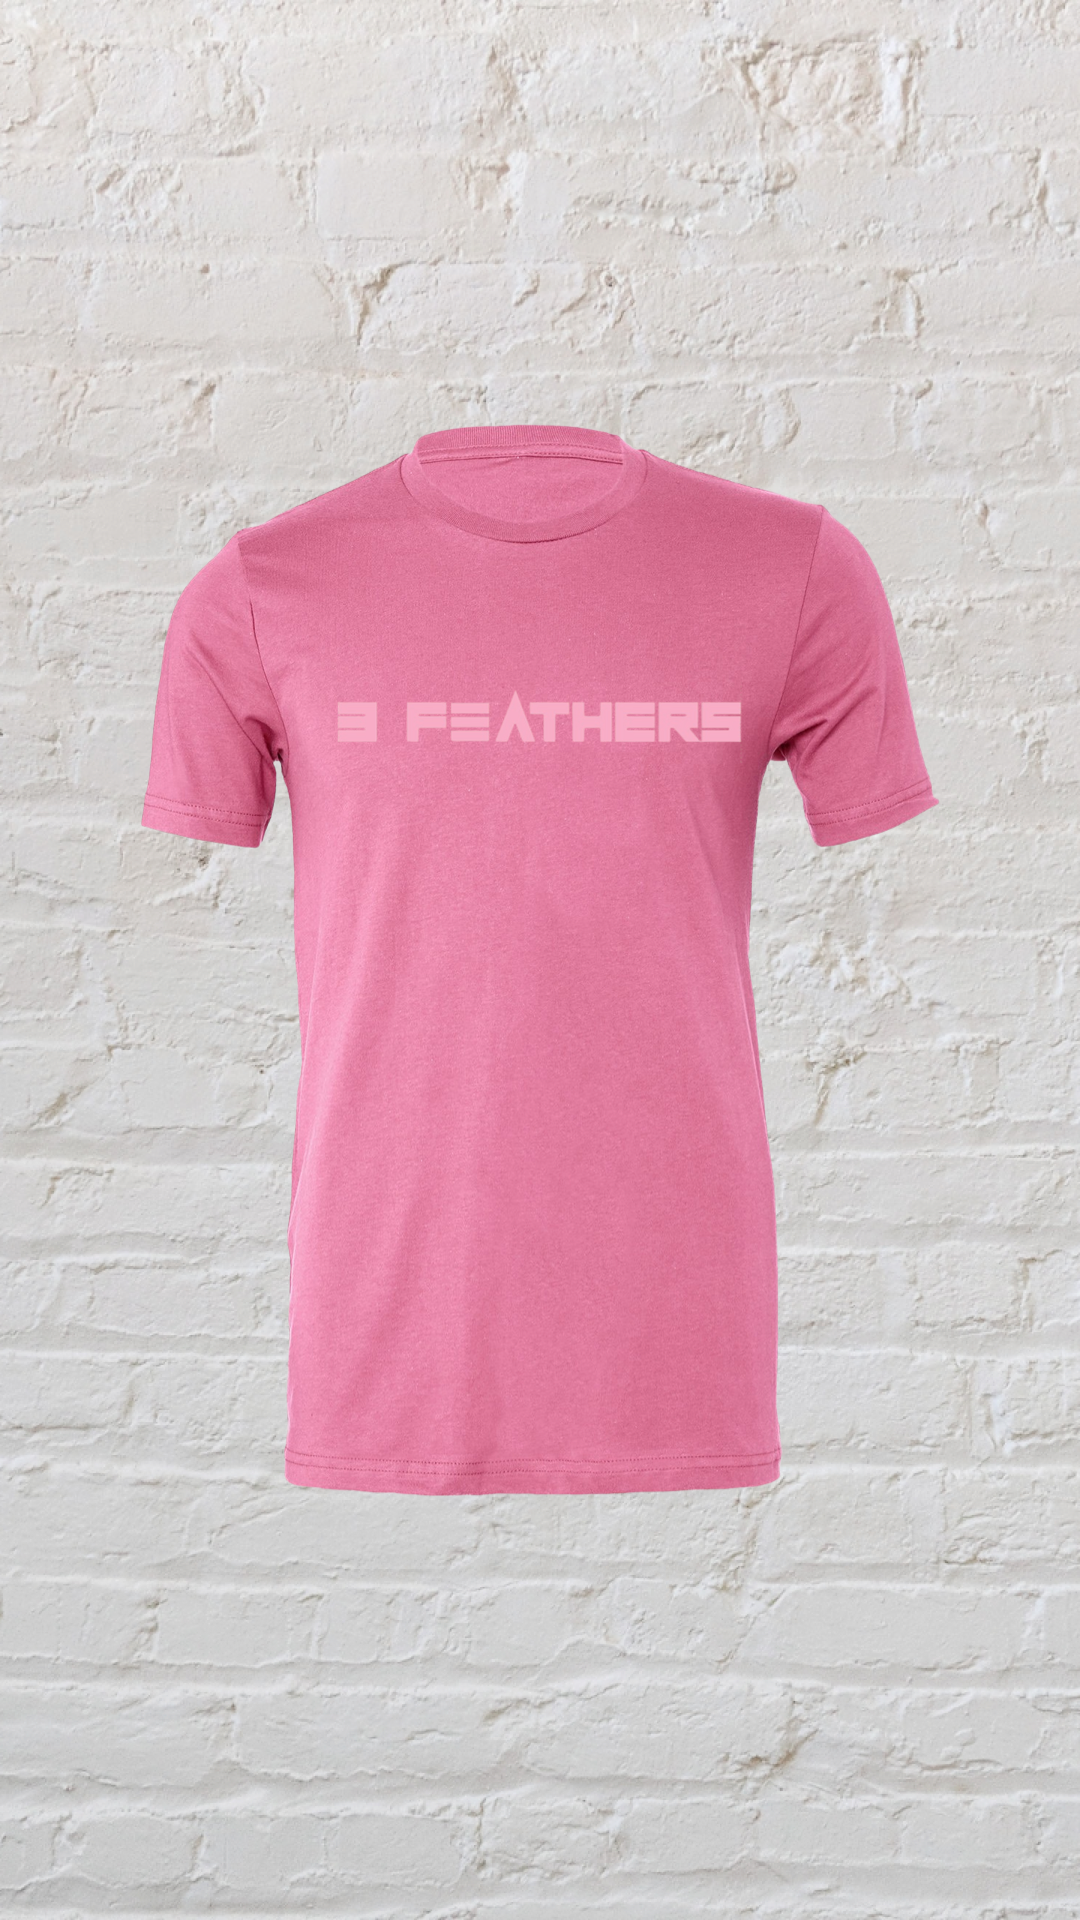 Be My Snag "3 Feathers"  T-shirt